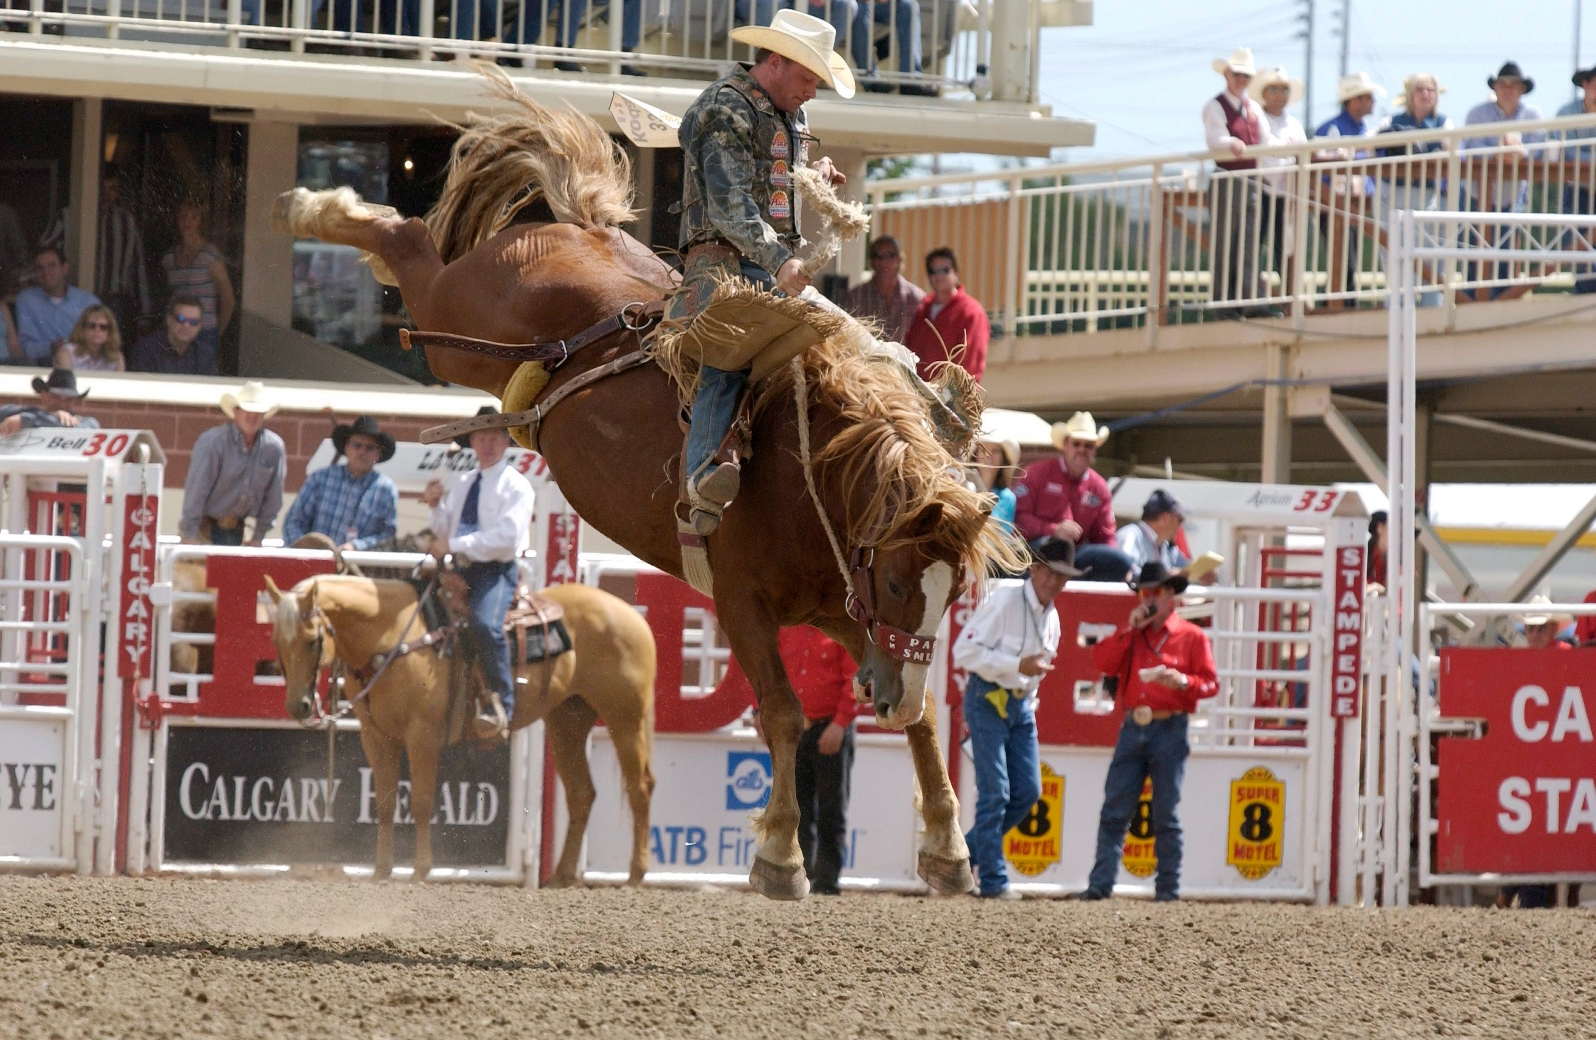 /assets/contentimages/Calgary_Stampede.jpg